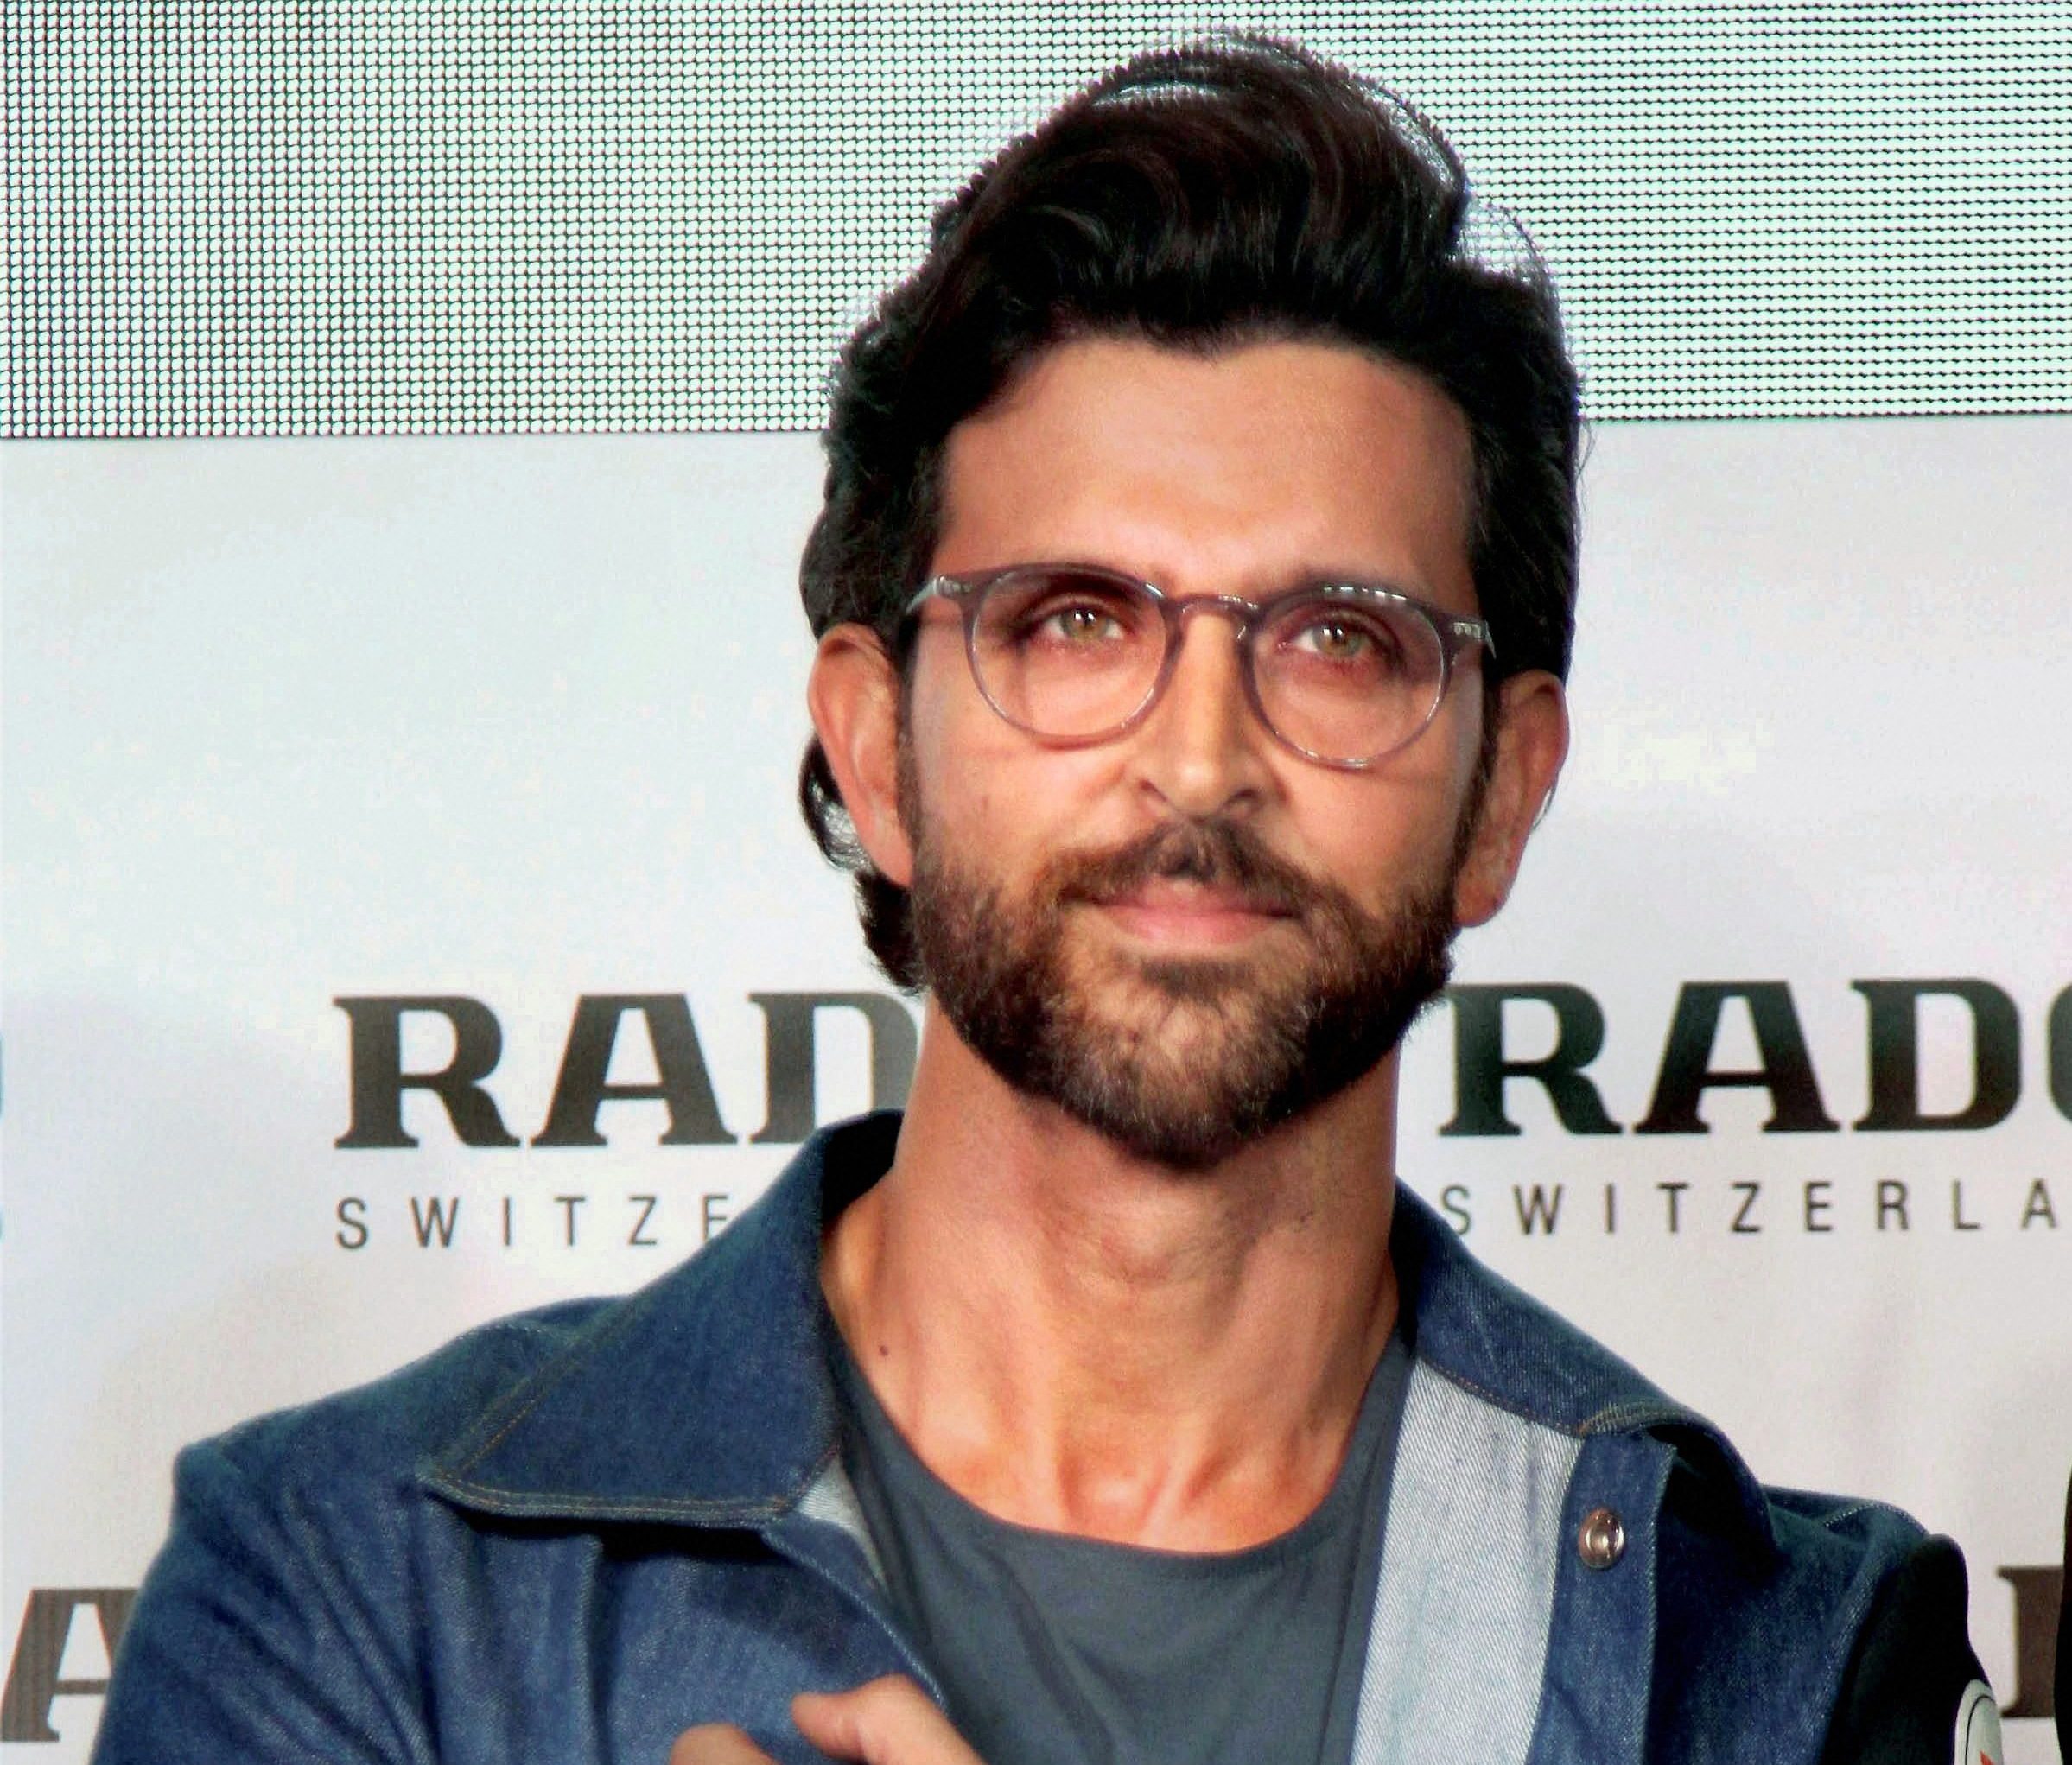 Hrithik Roshan Photo GalleryPhotos Pictures Filmography and Wallpapers  of Hrithik Roshan MensXP